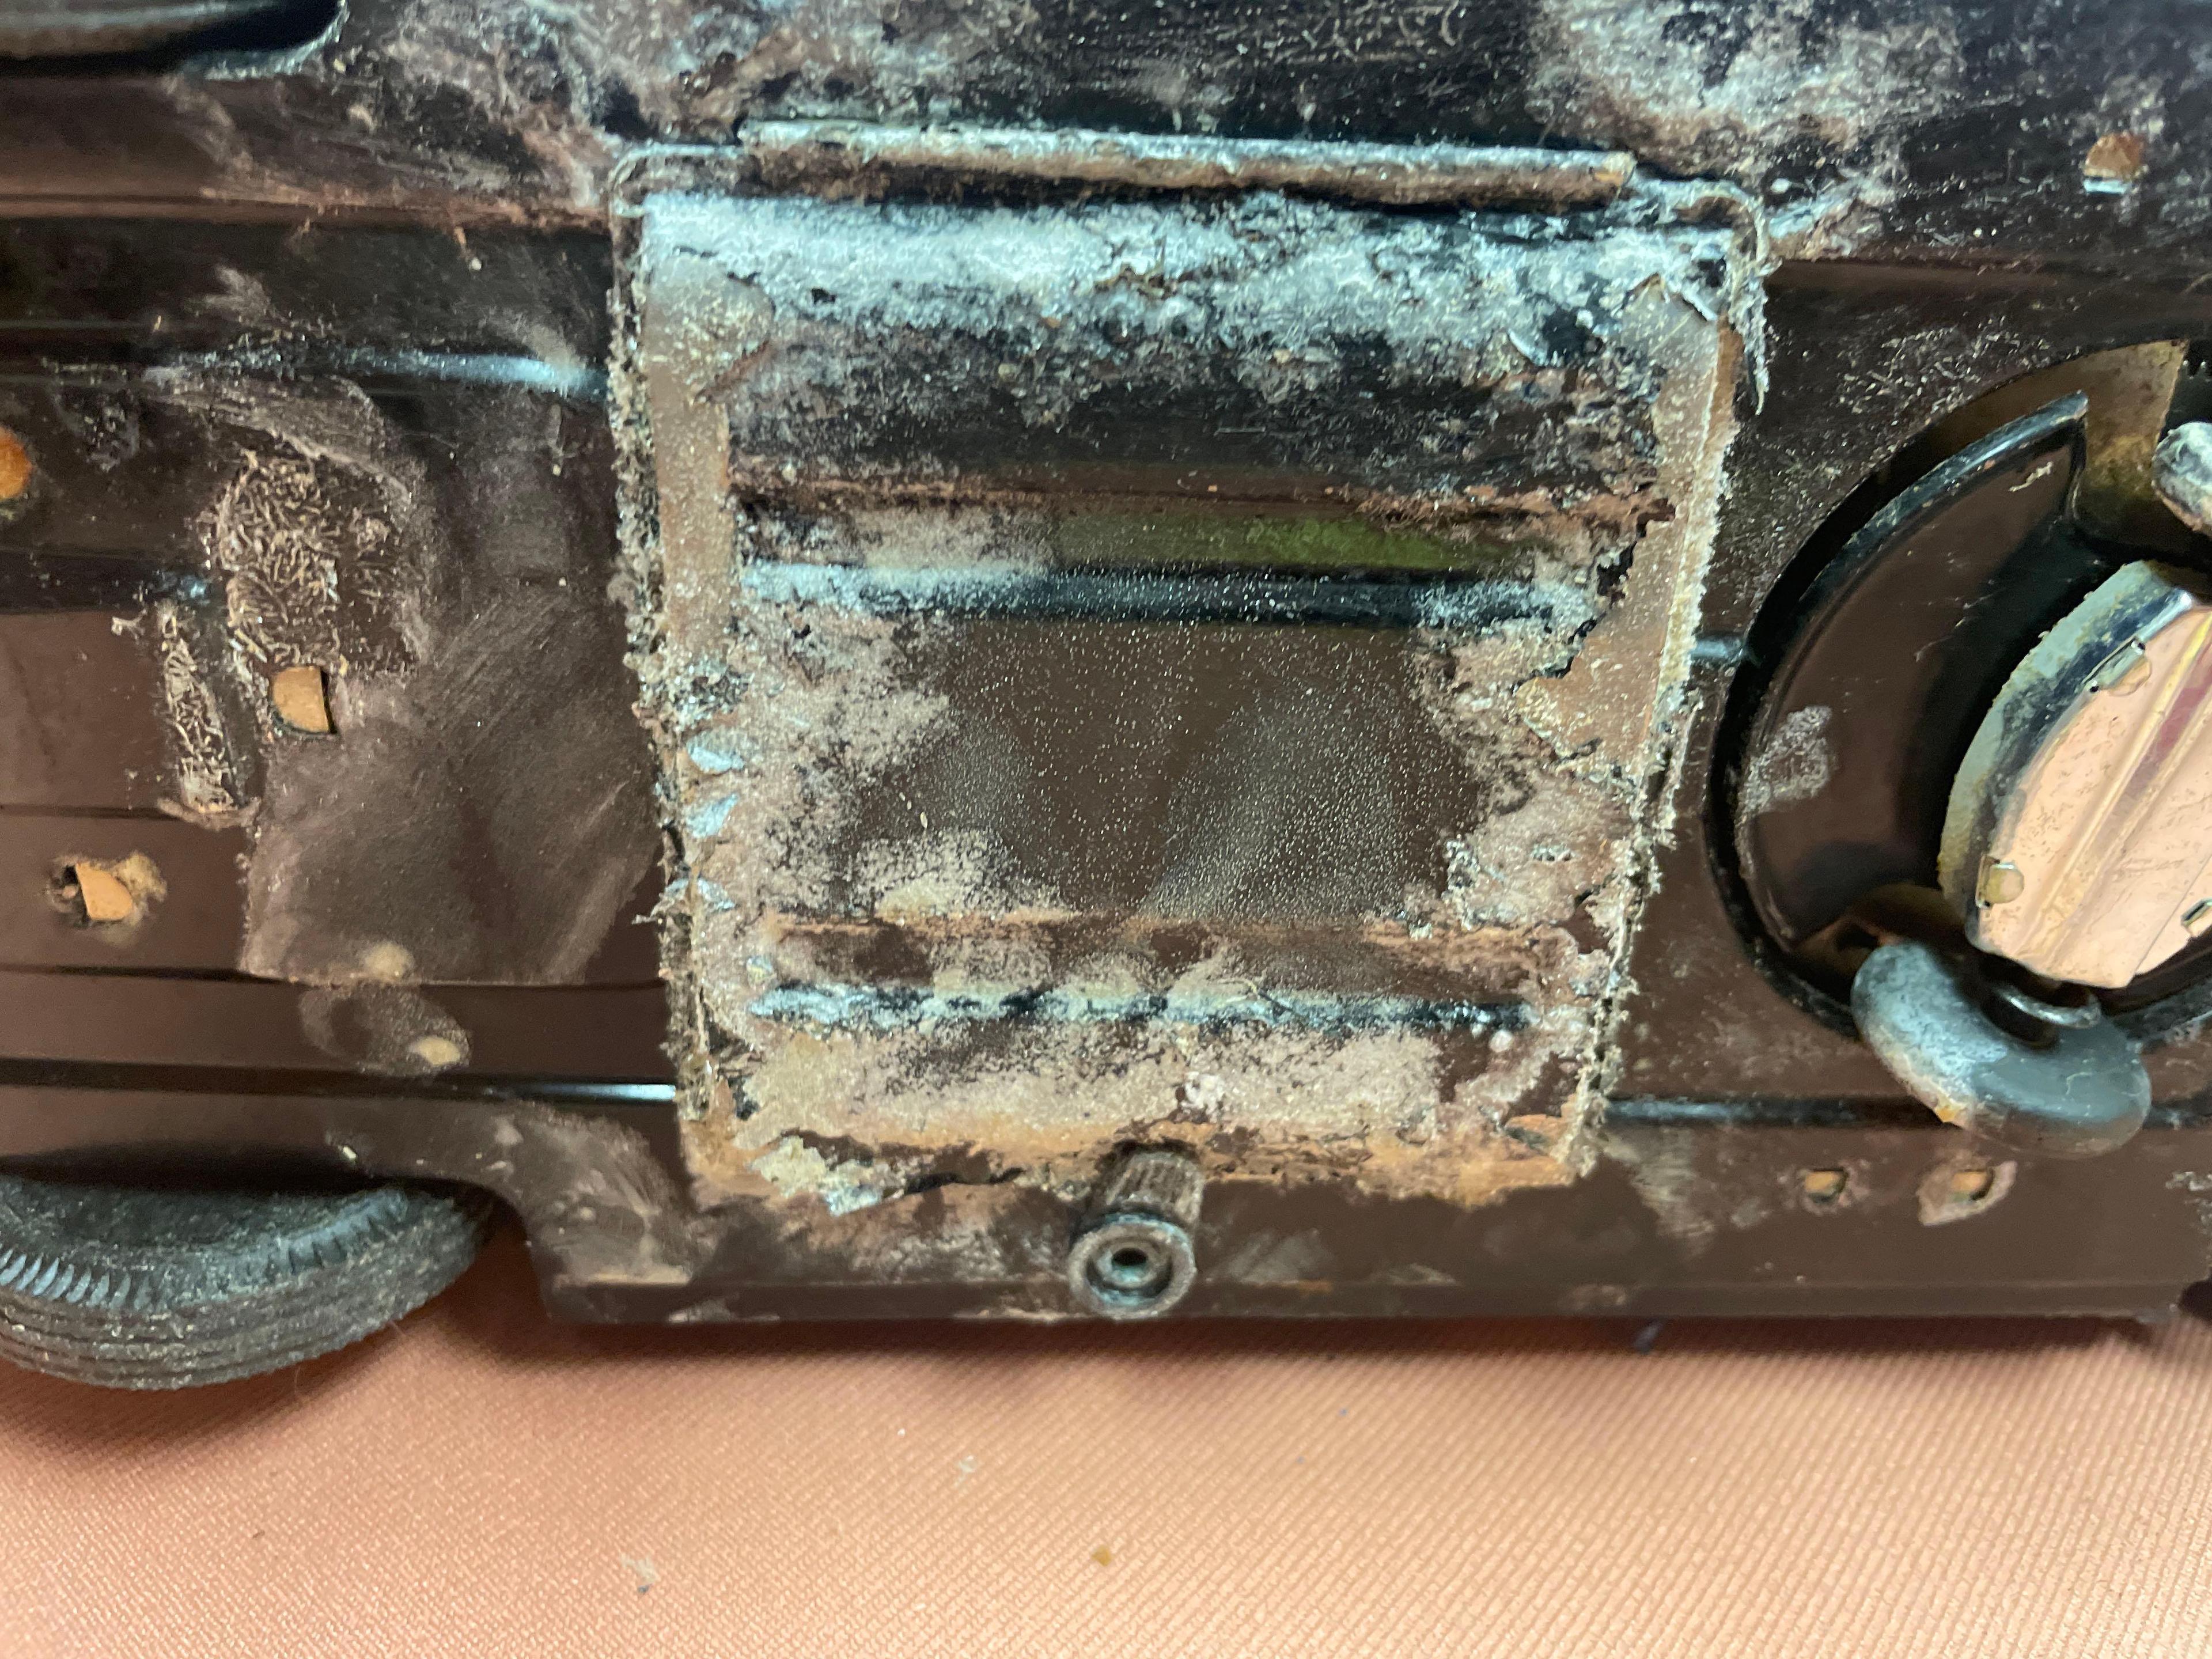 Ford Mustang battery operated car, battery box completely corroded